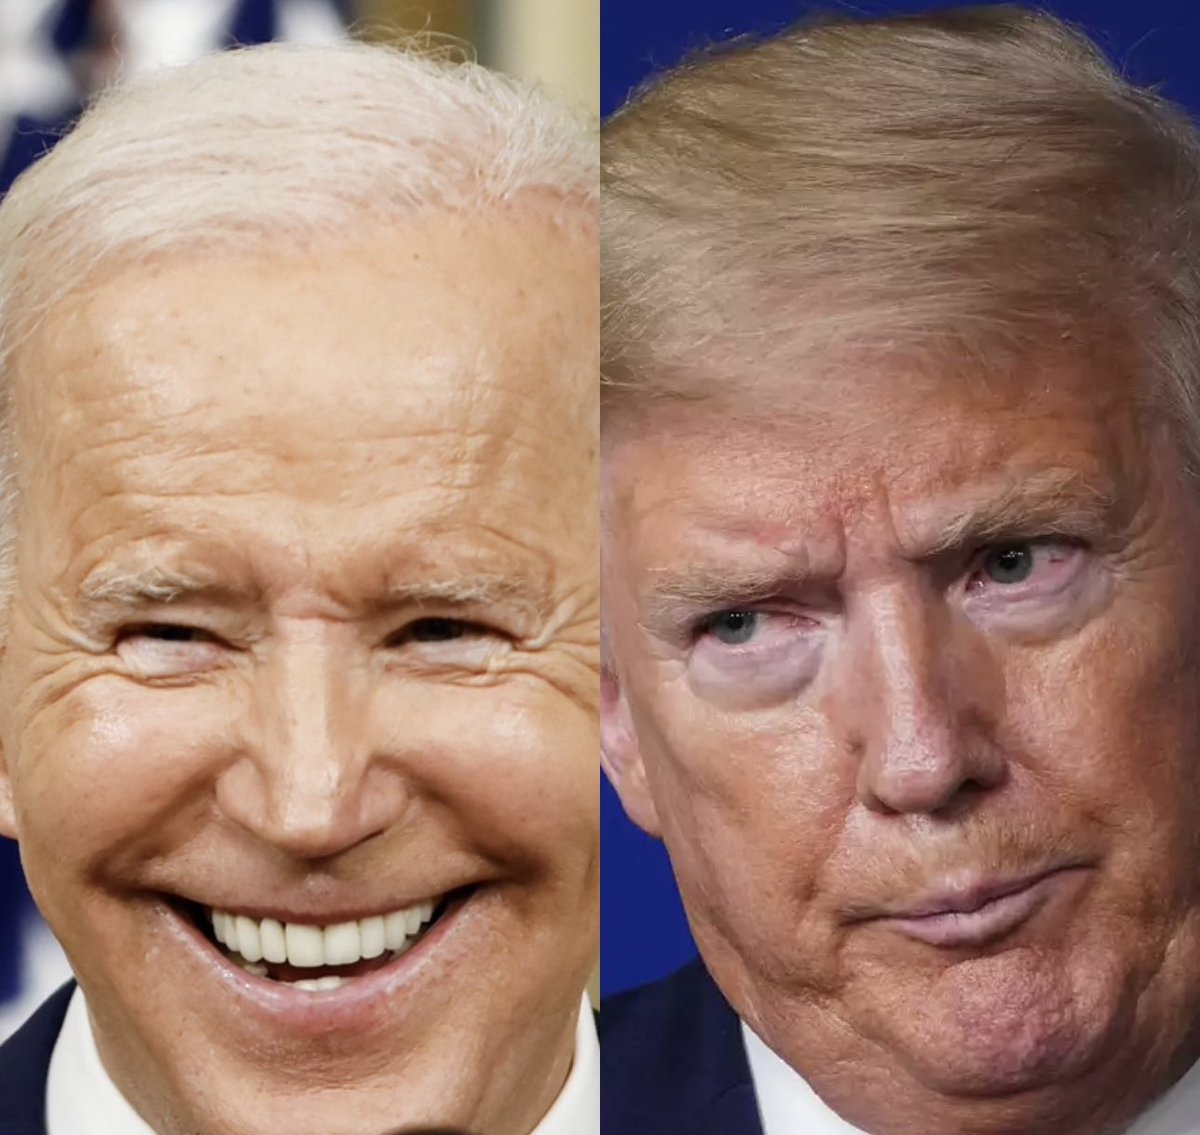 BREAKING: President Biden drops bombshell, announces that he just joined Donald Trump’s Truth Social in order to “combat” the “disinformation” pushed by Trump on his far-right social networking platform — and starts off with a bang… In his first post, President Biden declared,